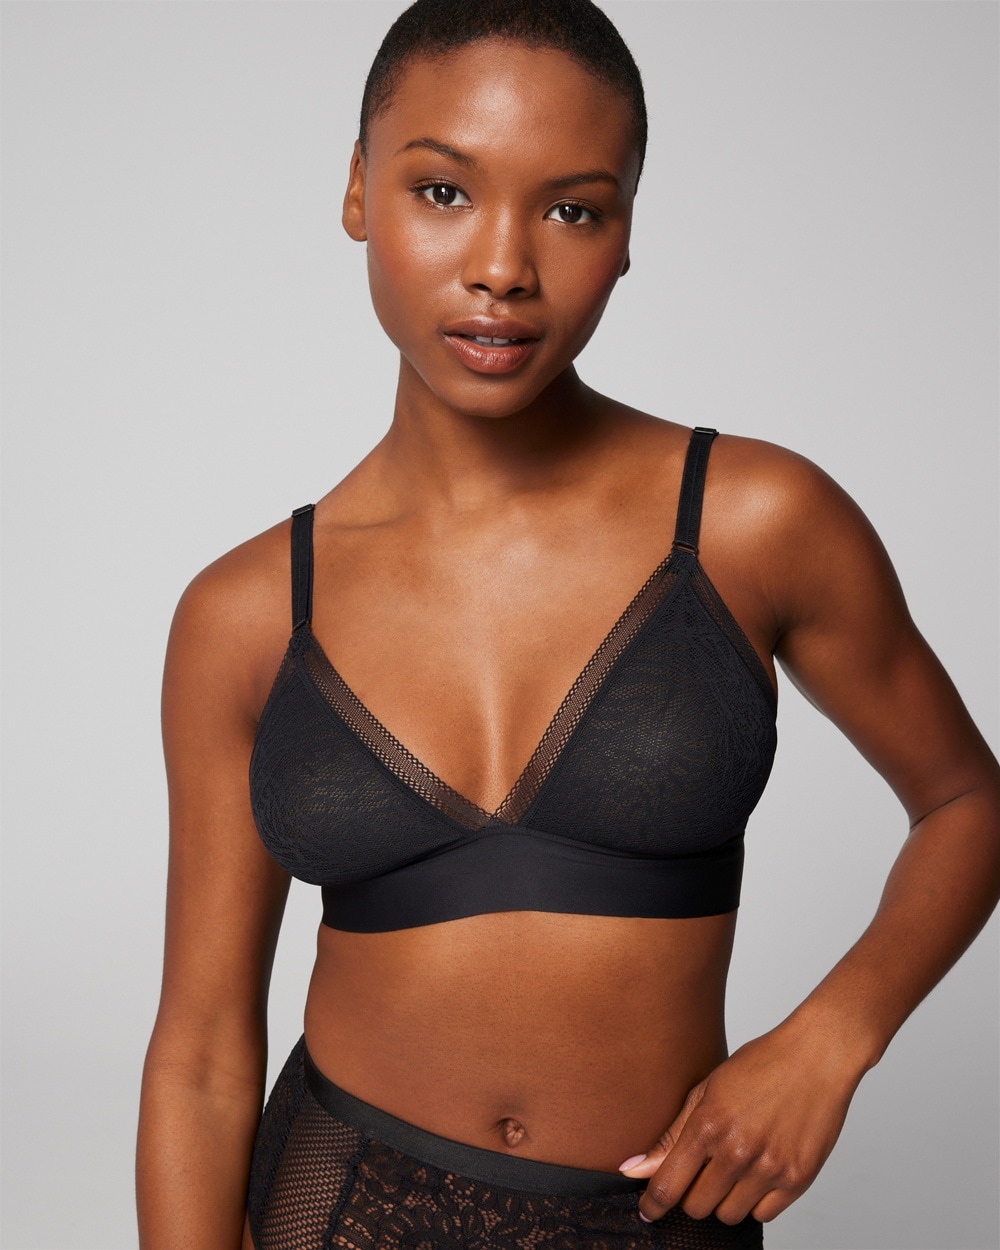 Specials While They Last! – UP Bras That Fit, Inc.